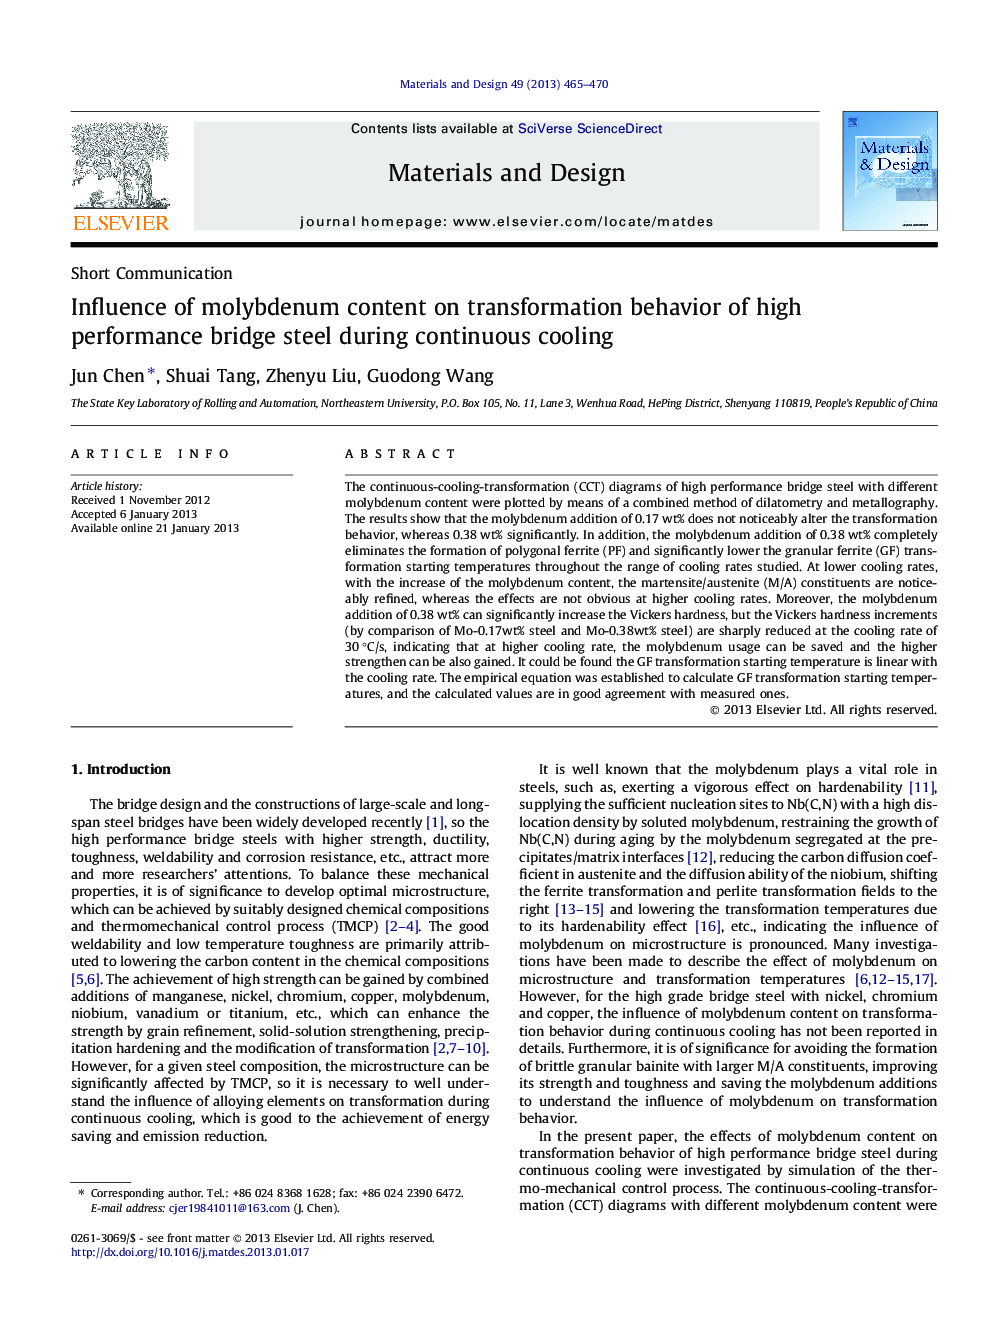 Influence of molybdenum content on transformation behavior of high performance bridge steel during continuous cooling